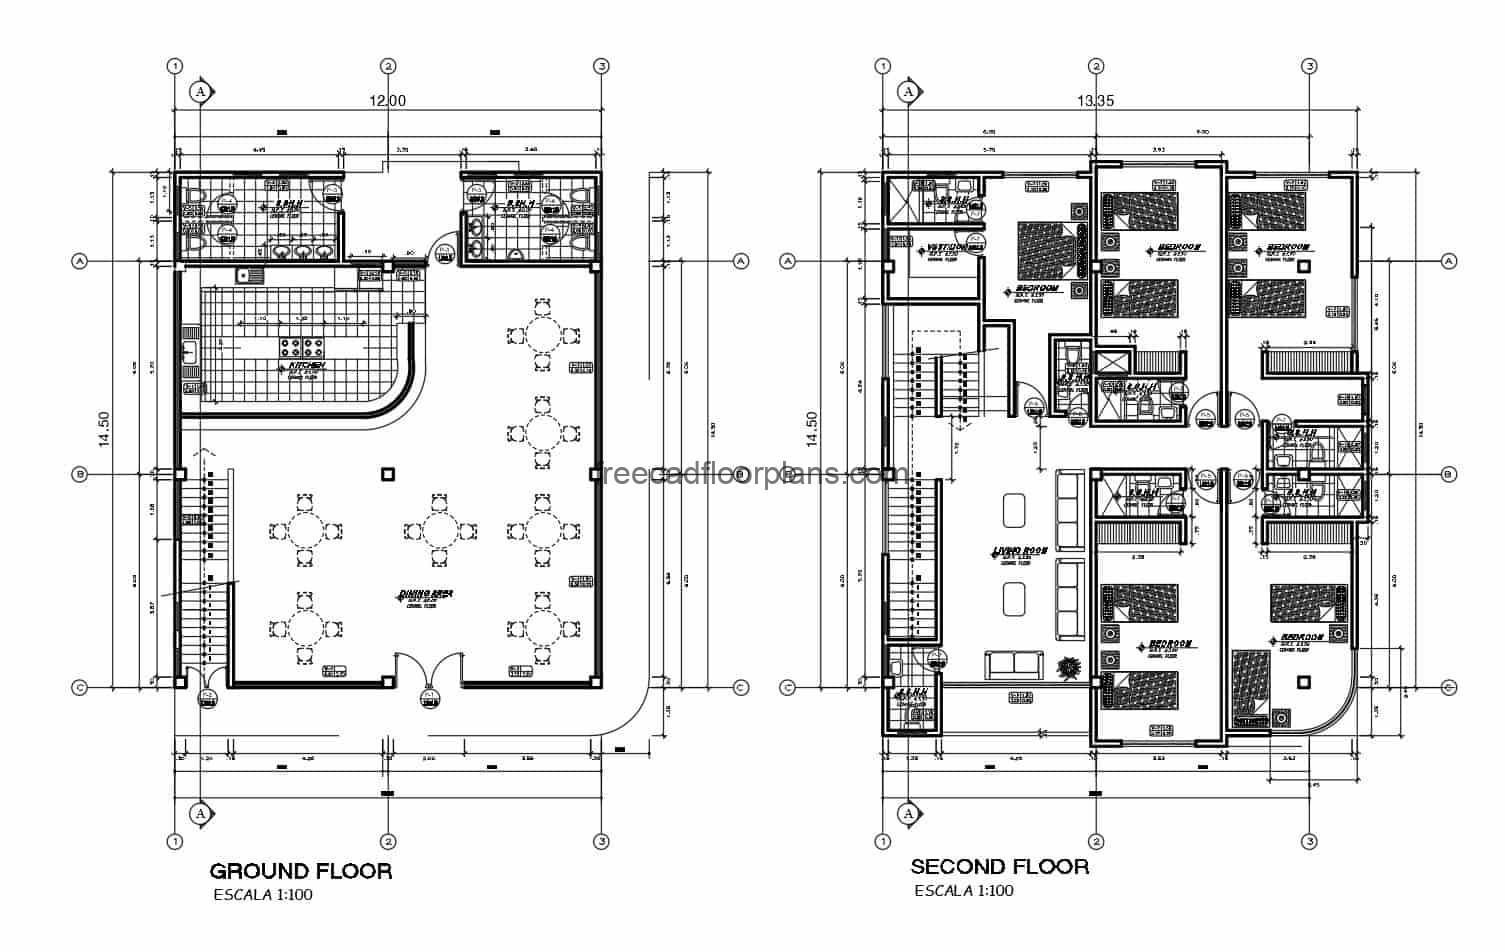 Mixed commercial-residential building, building with kitchen-restaurant on the first level and two upper levels with living quarters, plans with details and drawings in DWG format for downloading by e-mail